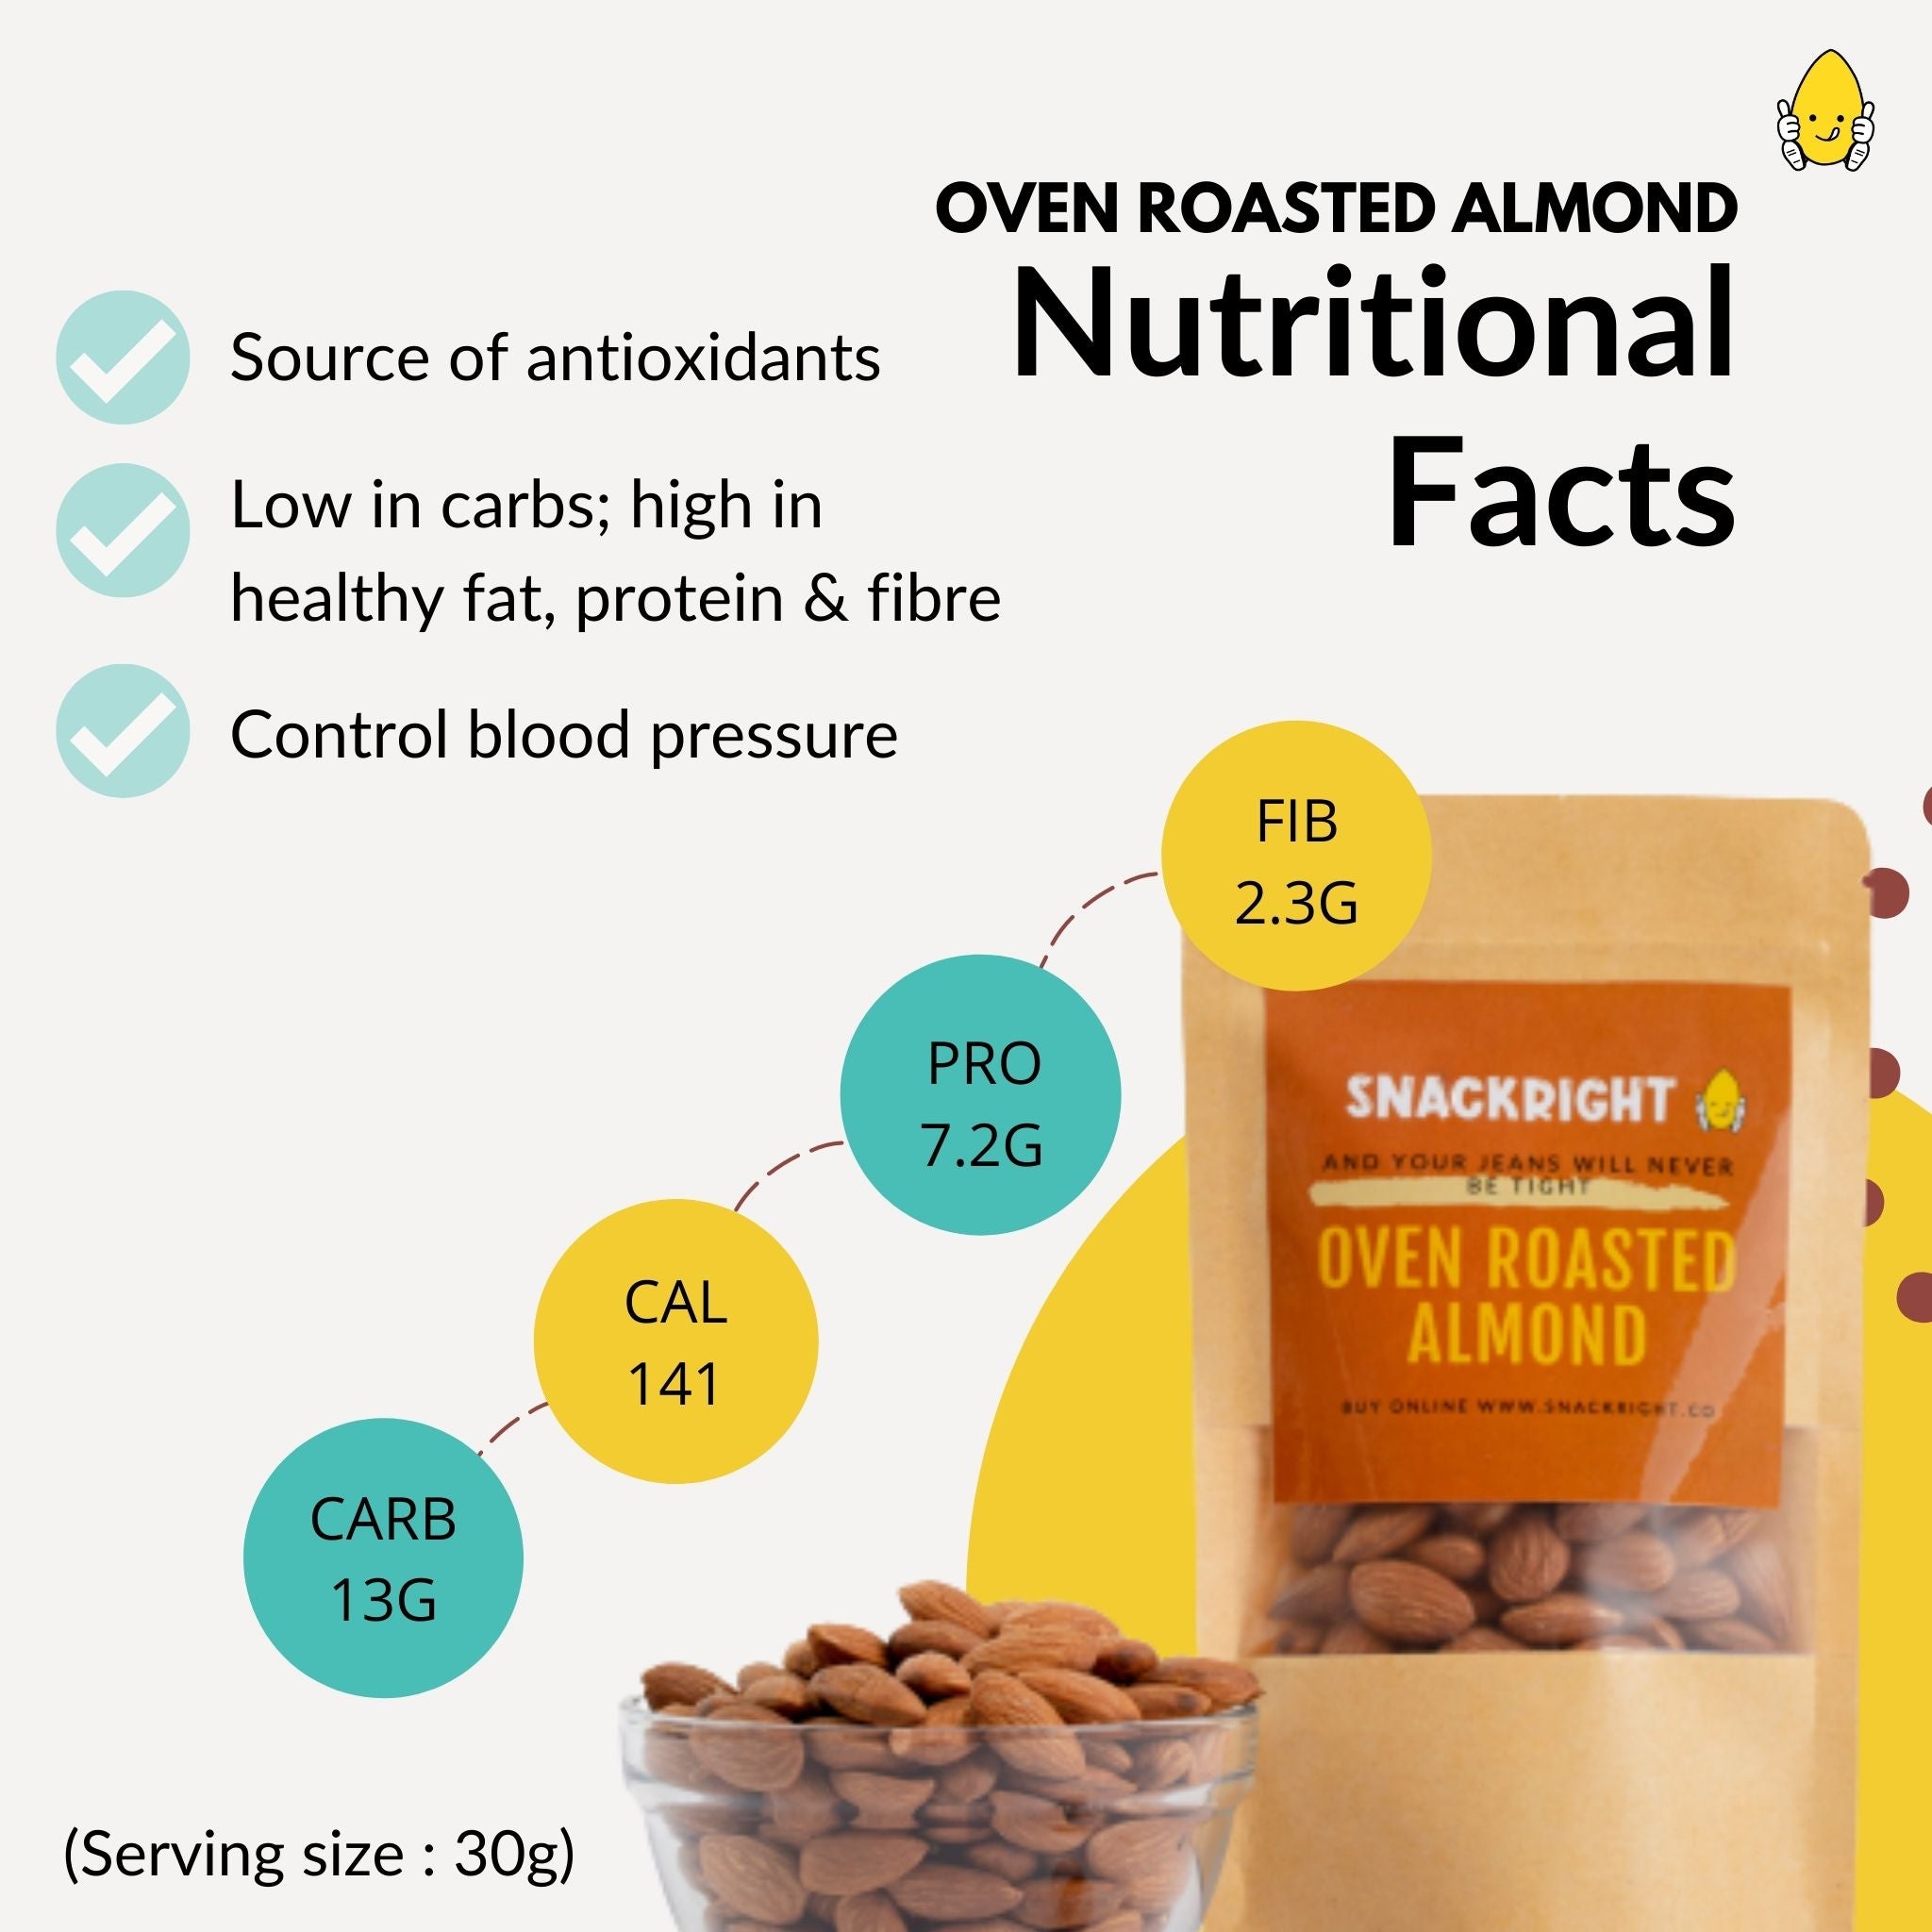 Nutritional facts and benefits of oven roasted almond 